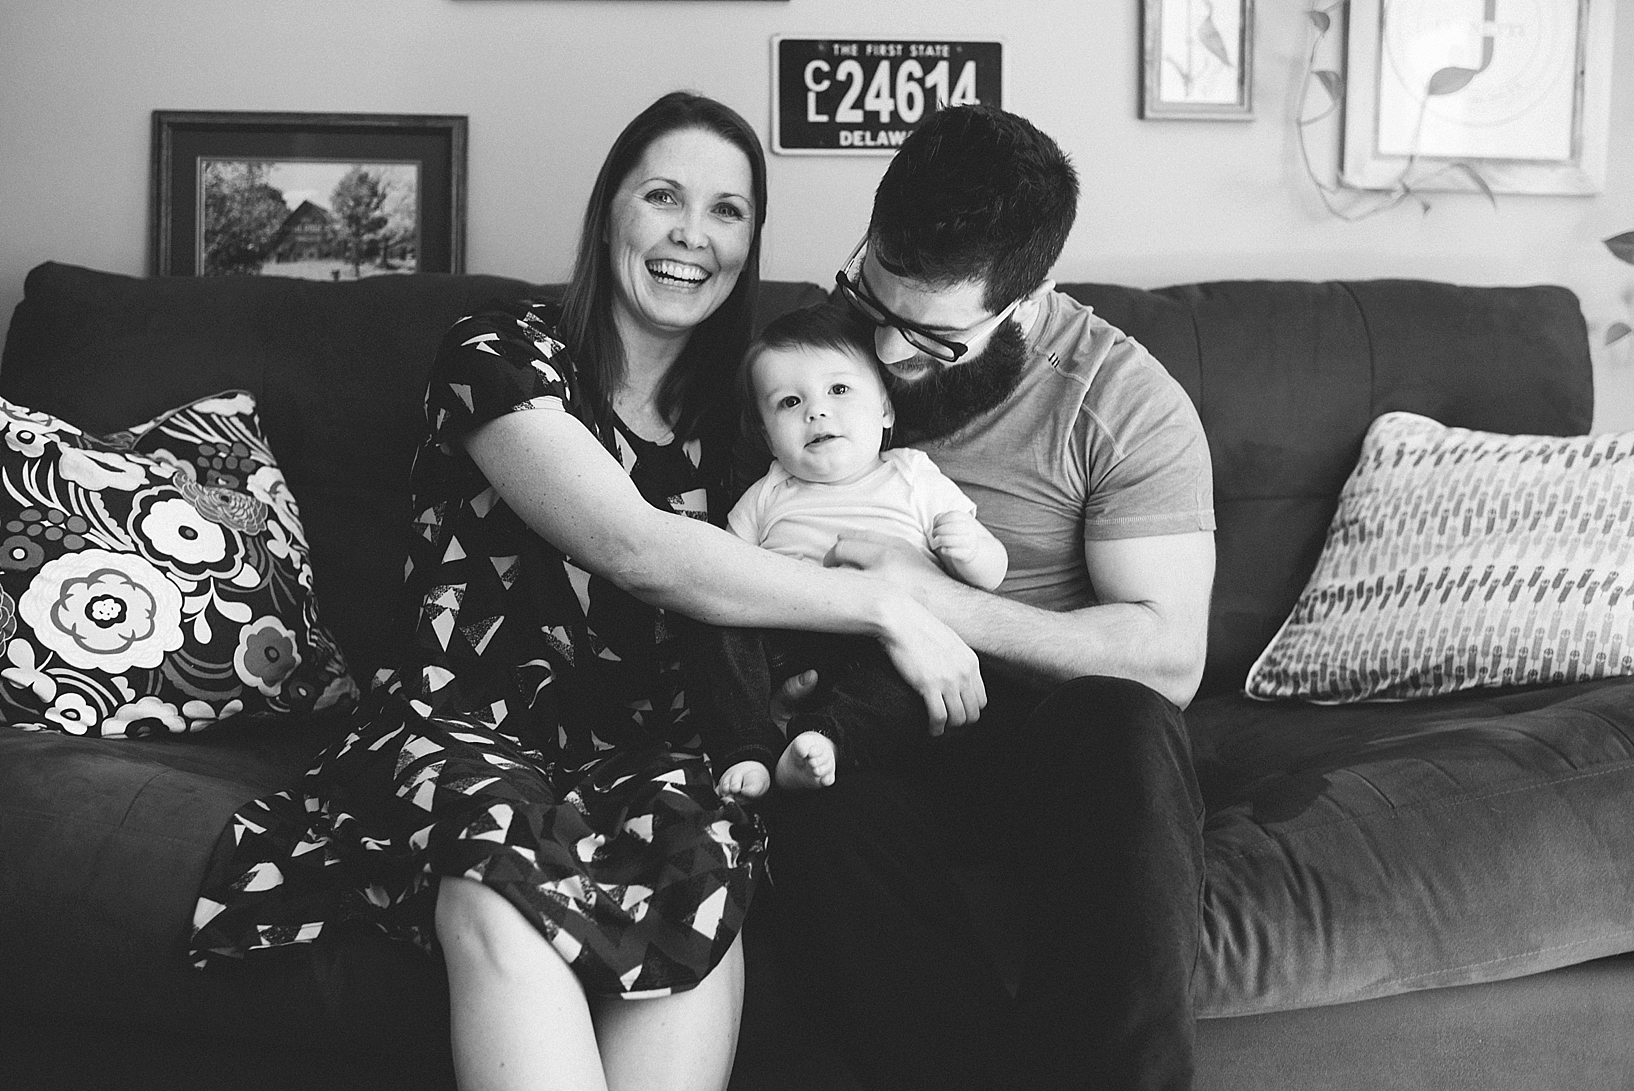 mom in Lularoe dress and dad holding young son on their laps sitting on couch